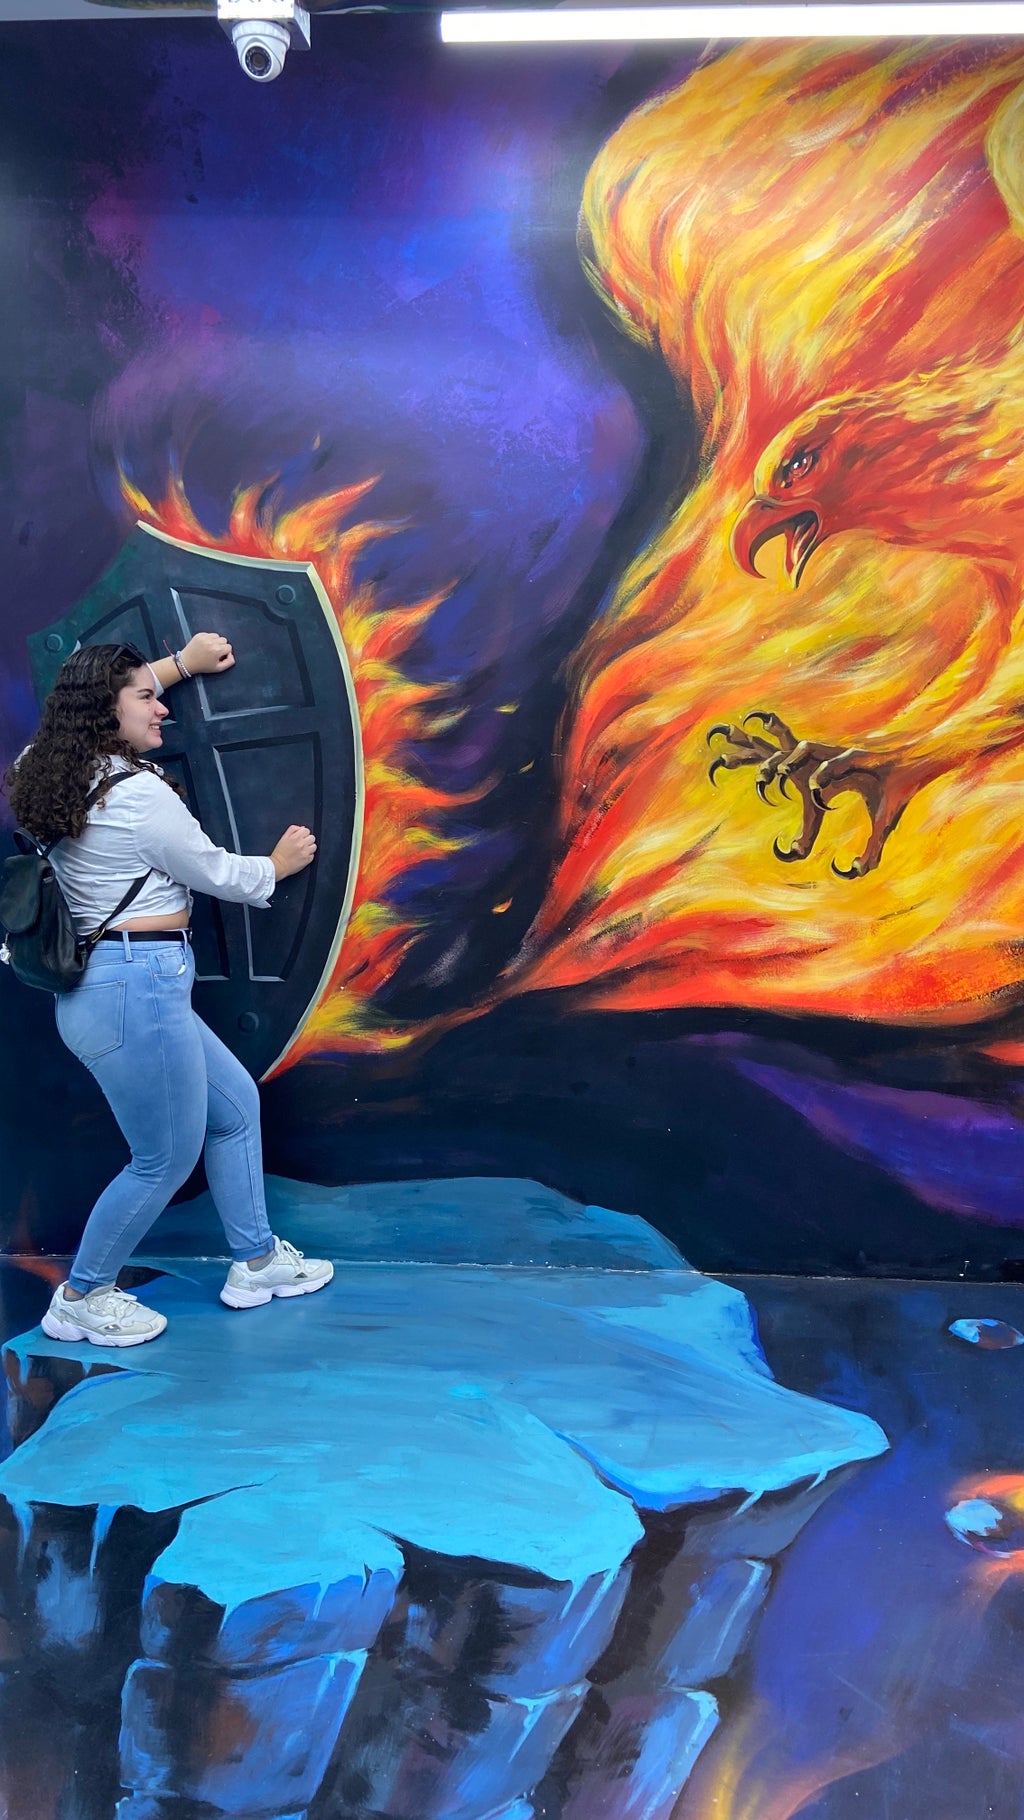 Girl posing with art wall illusion of a firebird and a shield